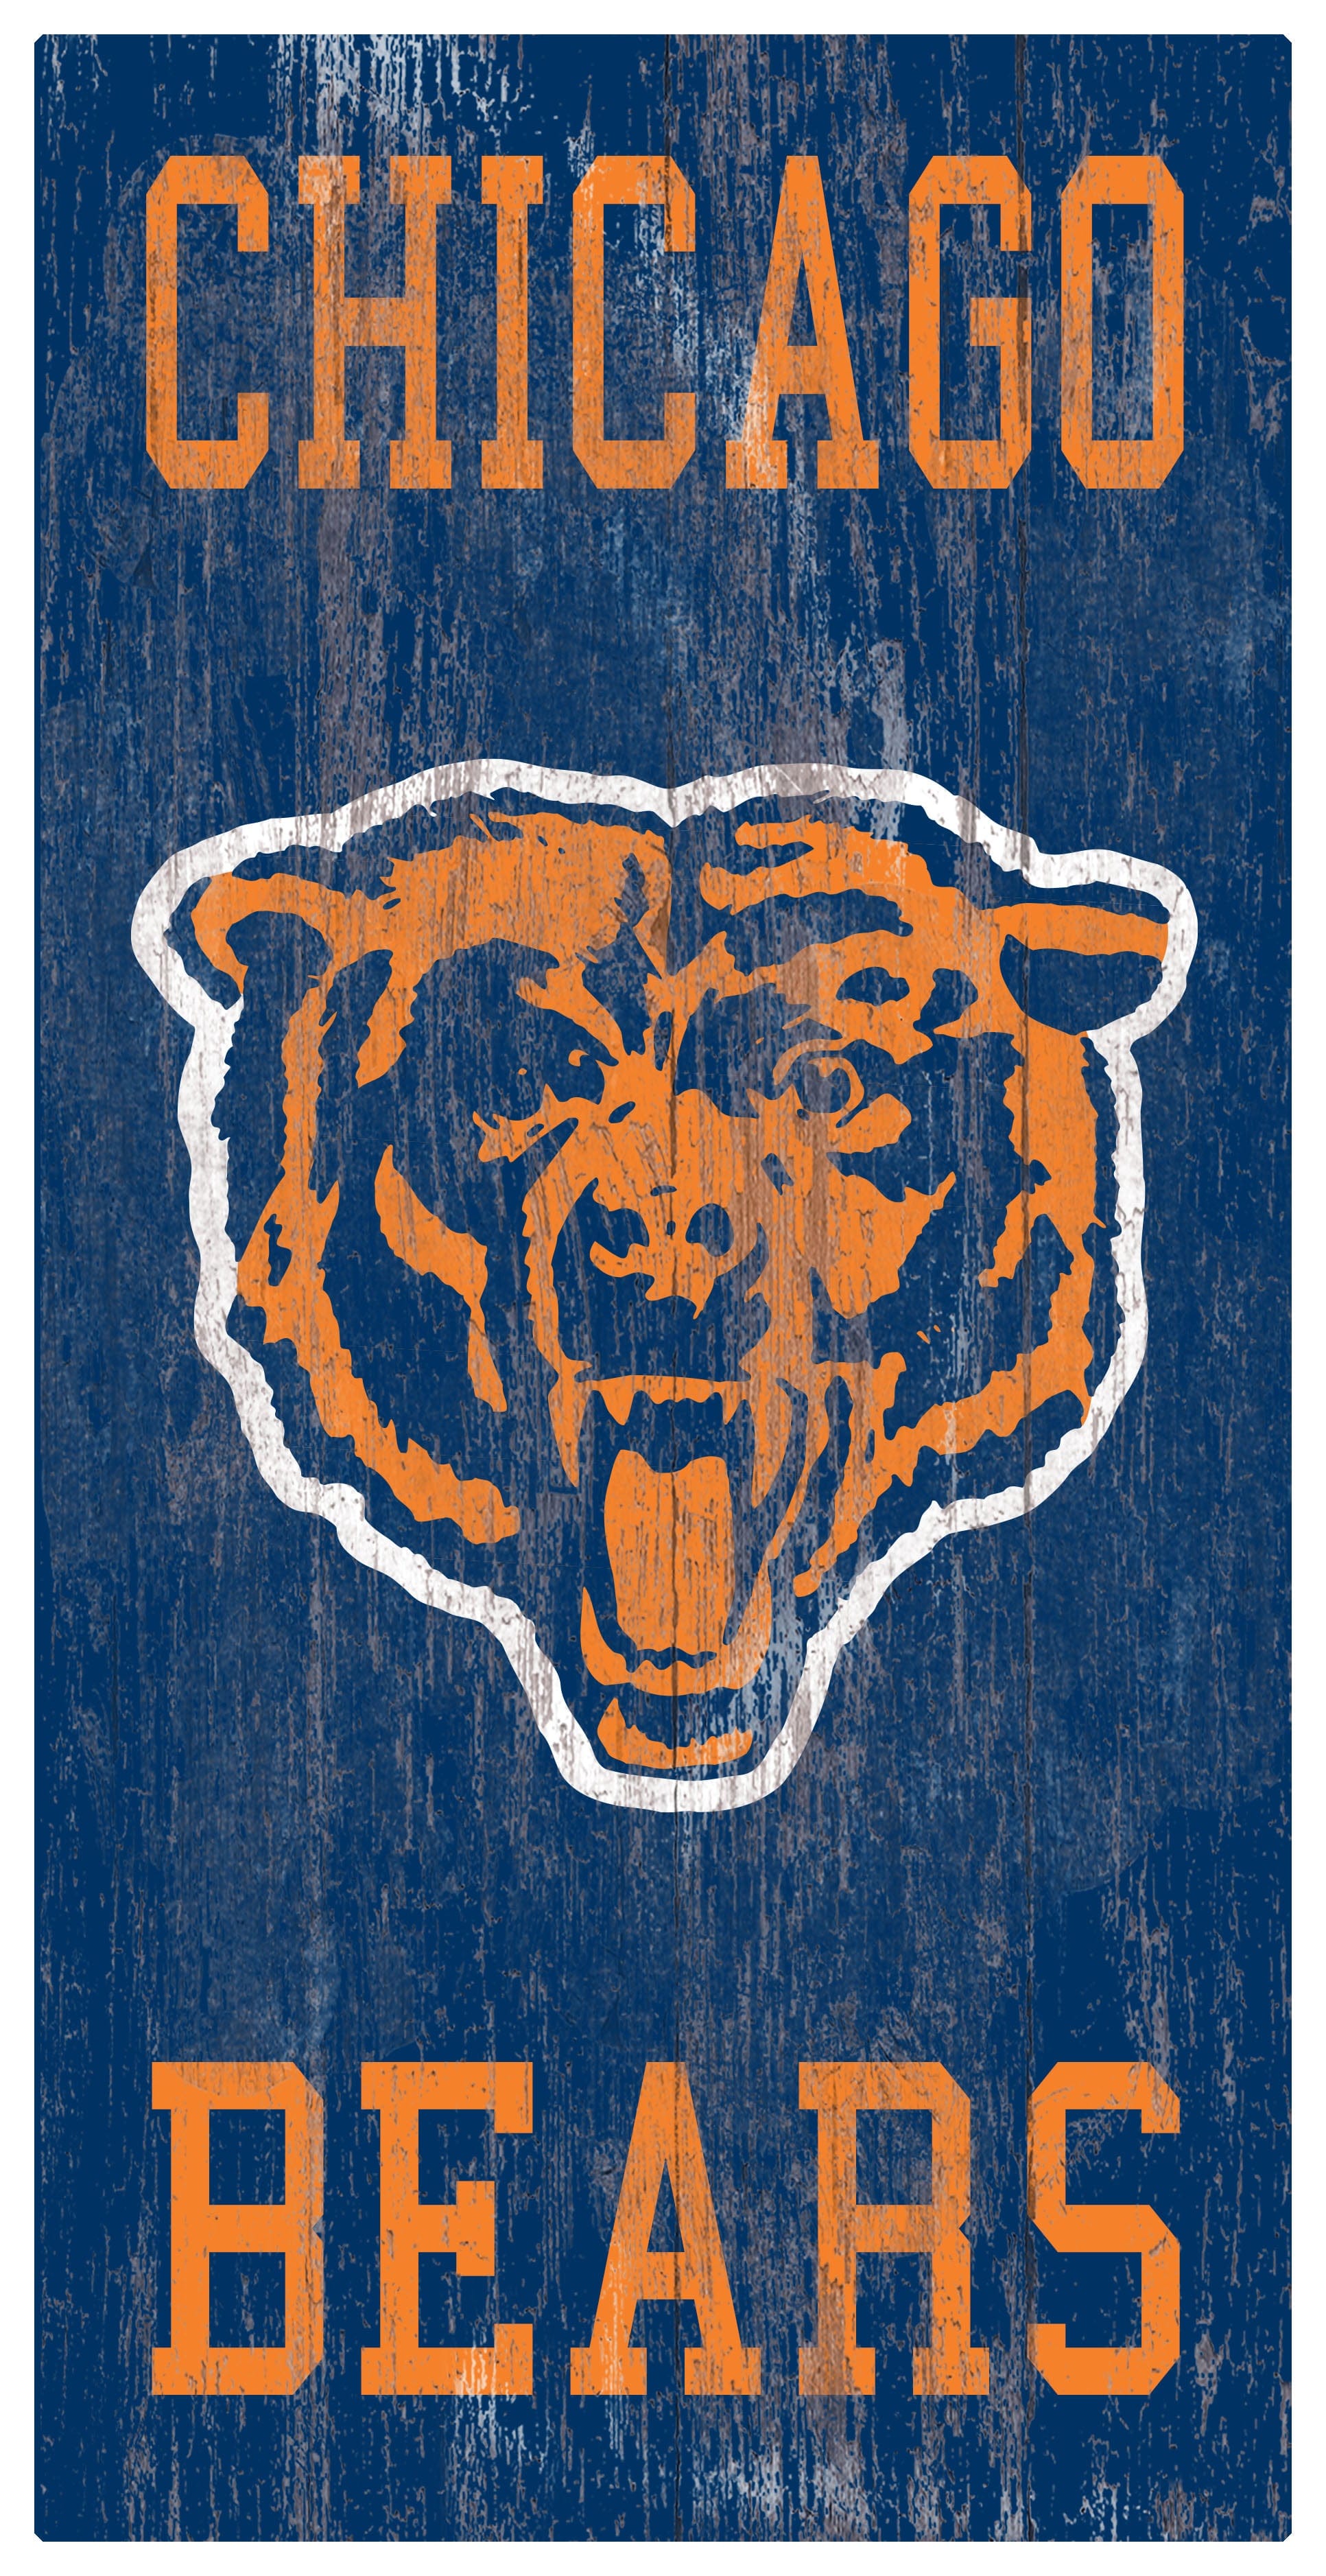 Chicago bulls chicago bears and Chicago Cubs logo teams new design